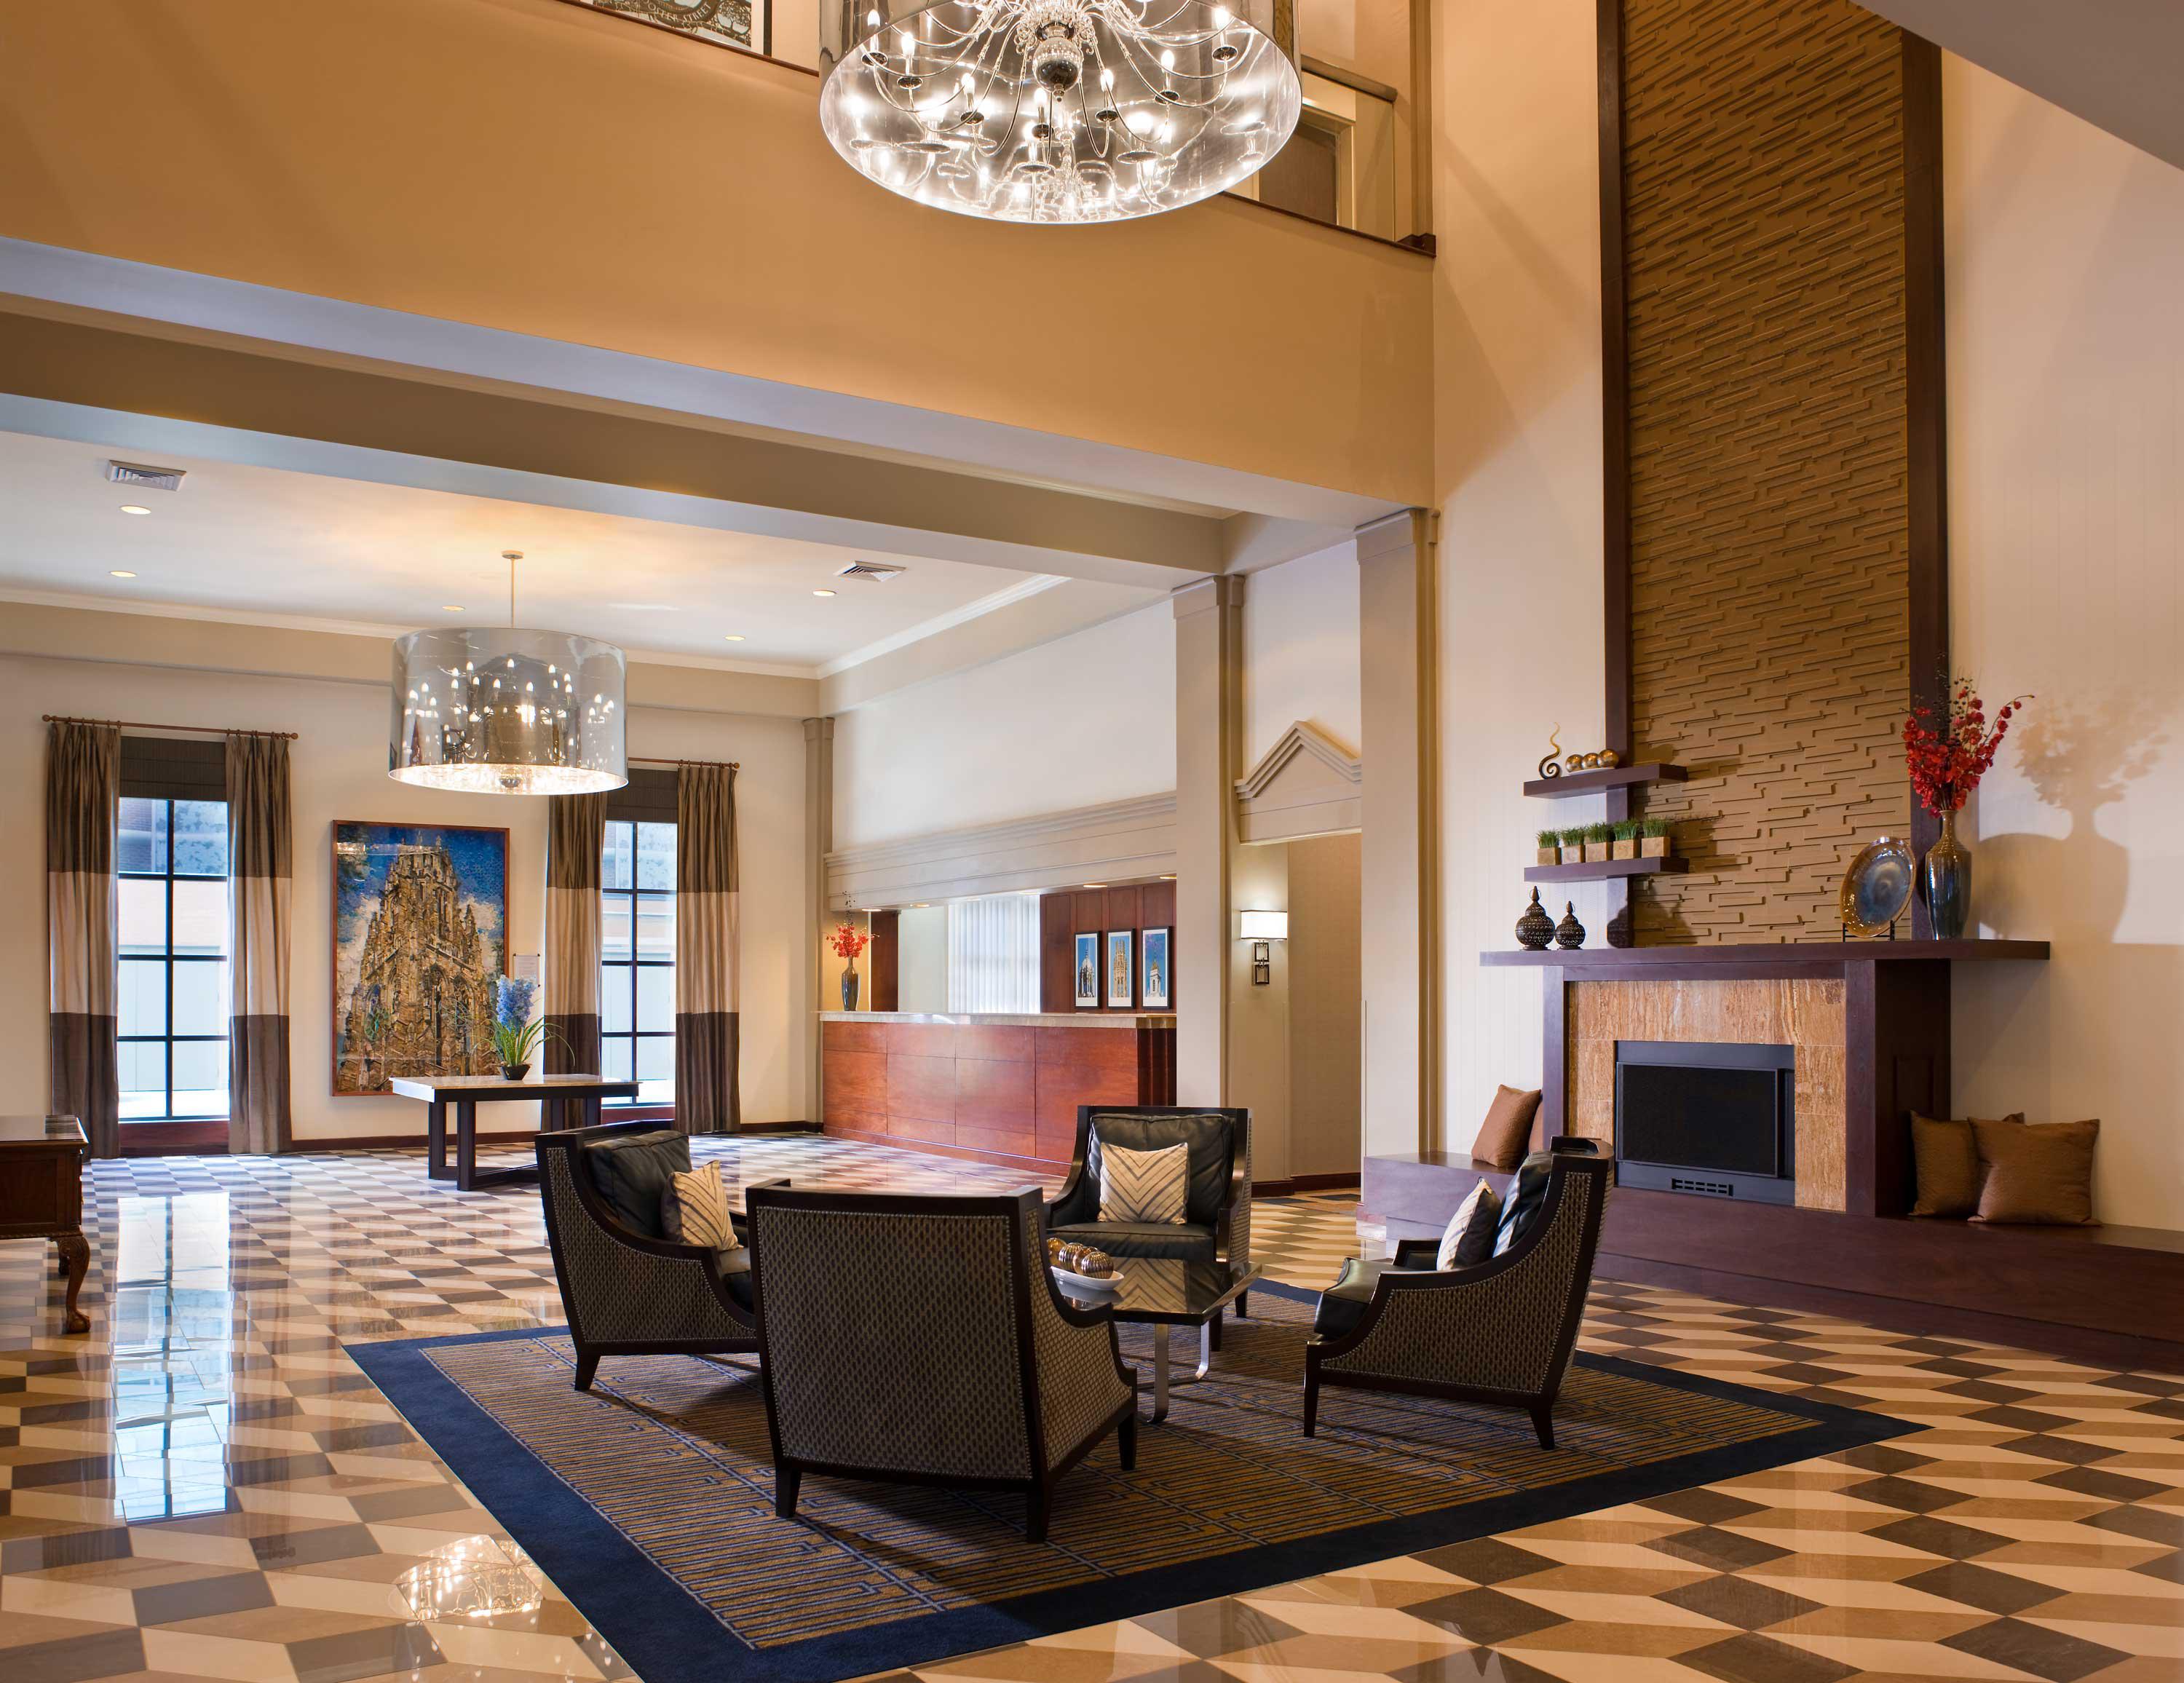 Our livingroom-style lobby features plenty of space for guests to gather at their leisure.